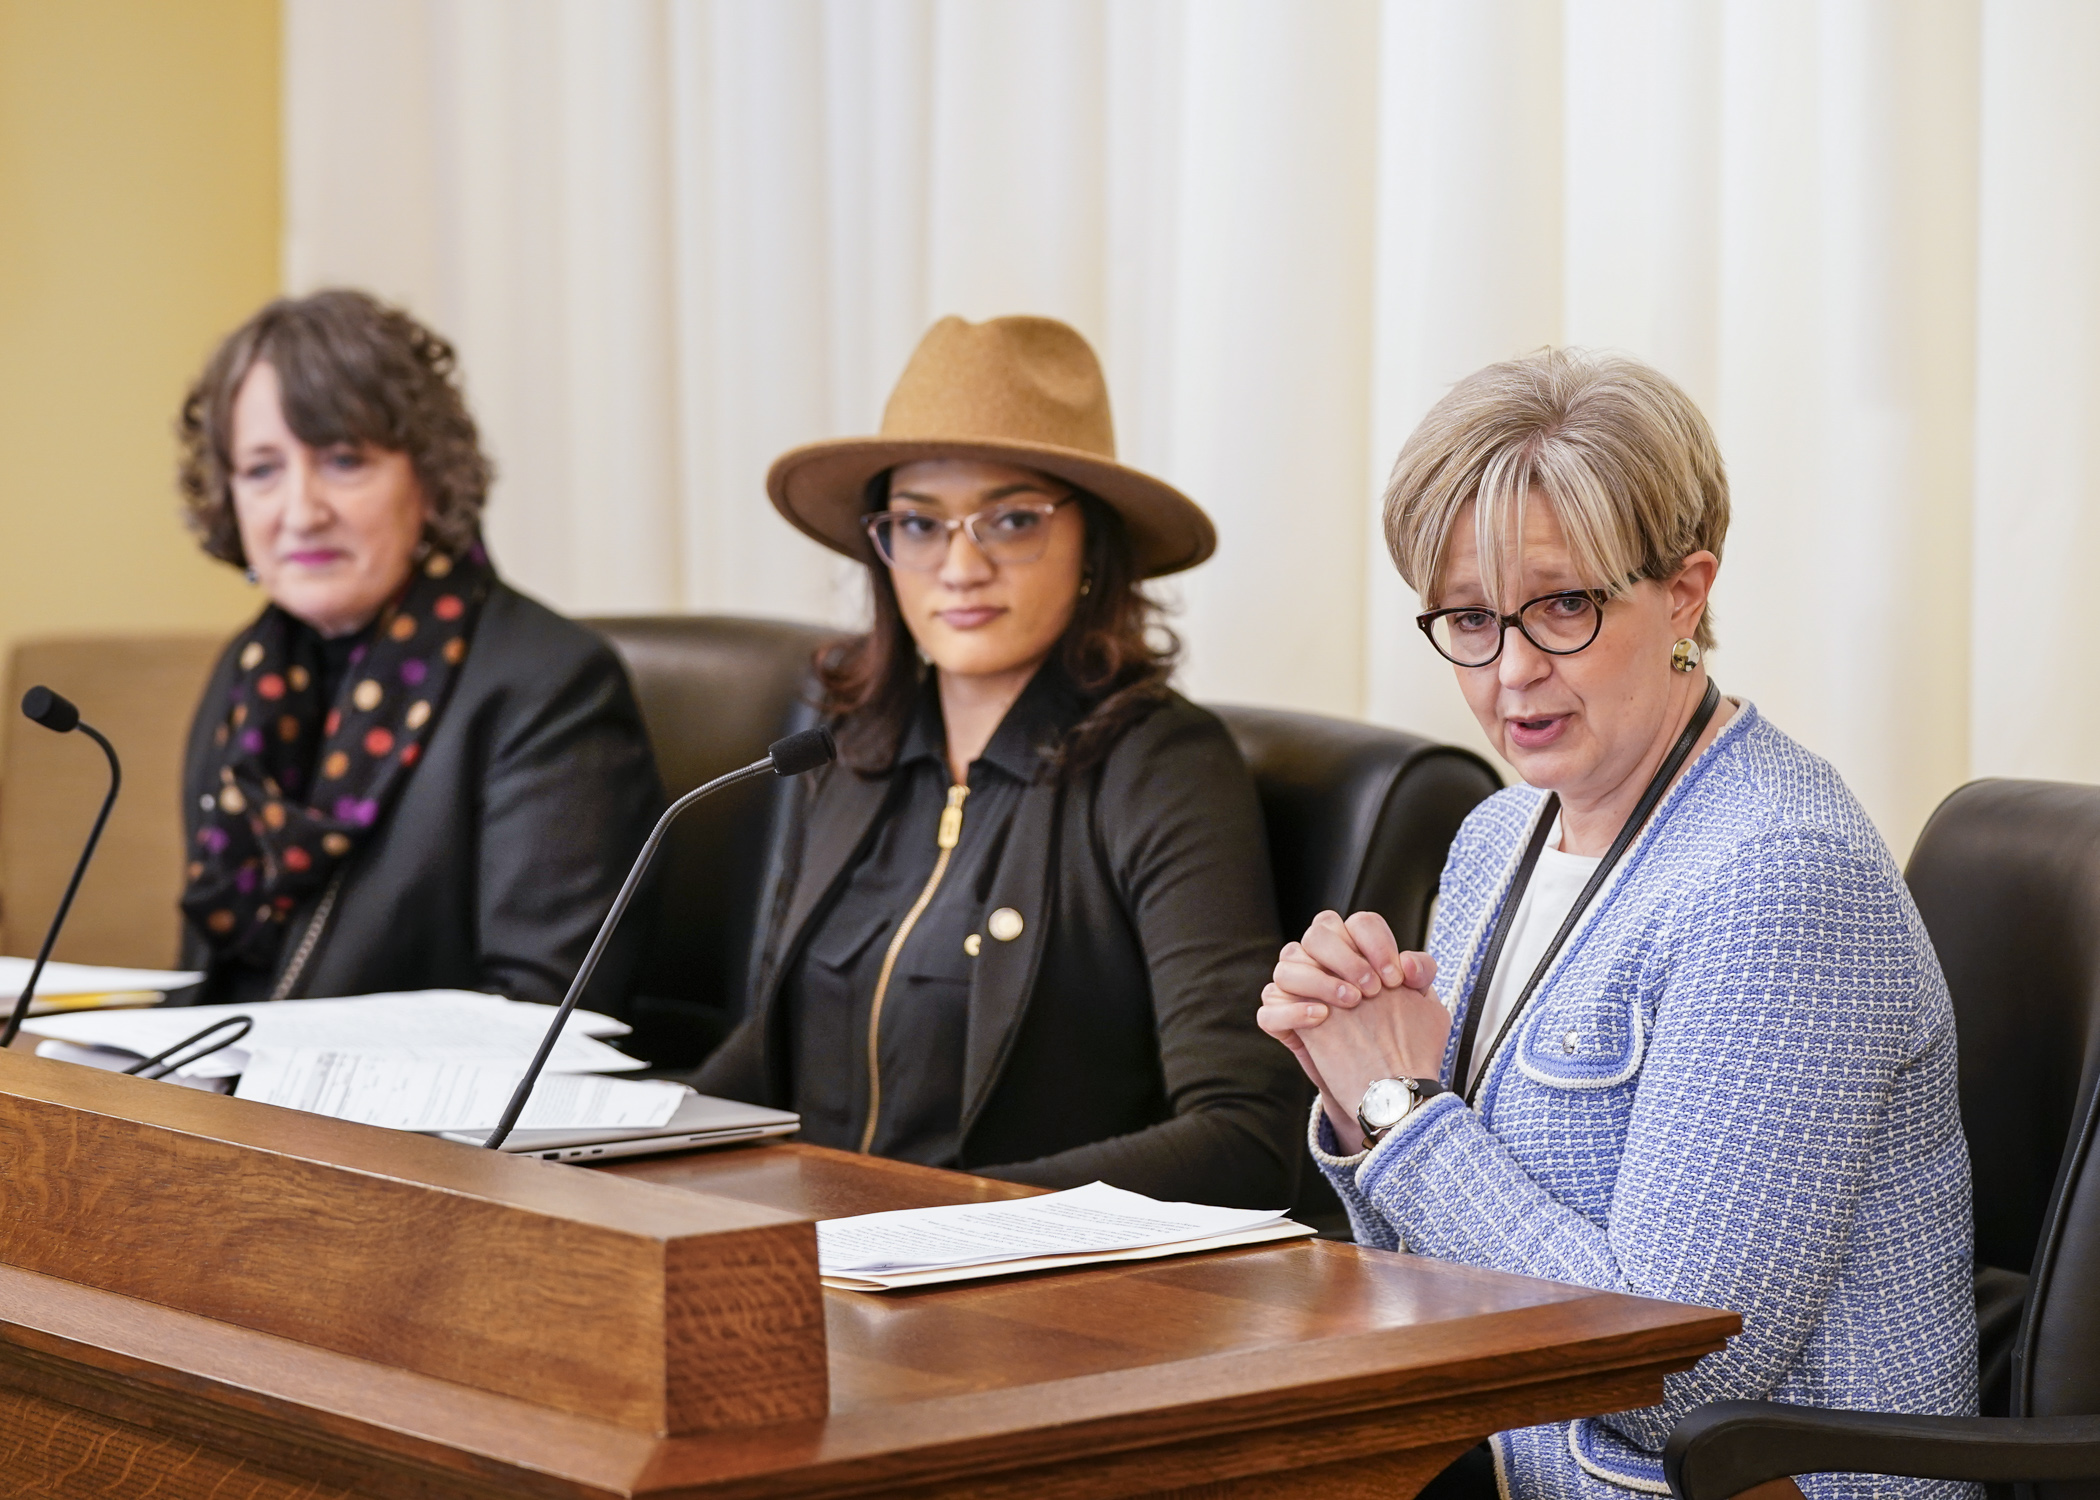 Lori Erickson, assistant director of Saint Paul Schools Office of Early Learning, testifies before the House Education Finance Committee Feb. 2 in support of HF456. Rep. María Isa Pérez-Vega, center, is the bill sponsor. (Photo by Catherine Davis)